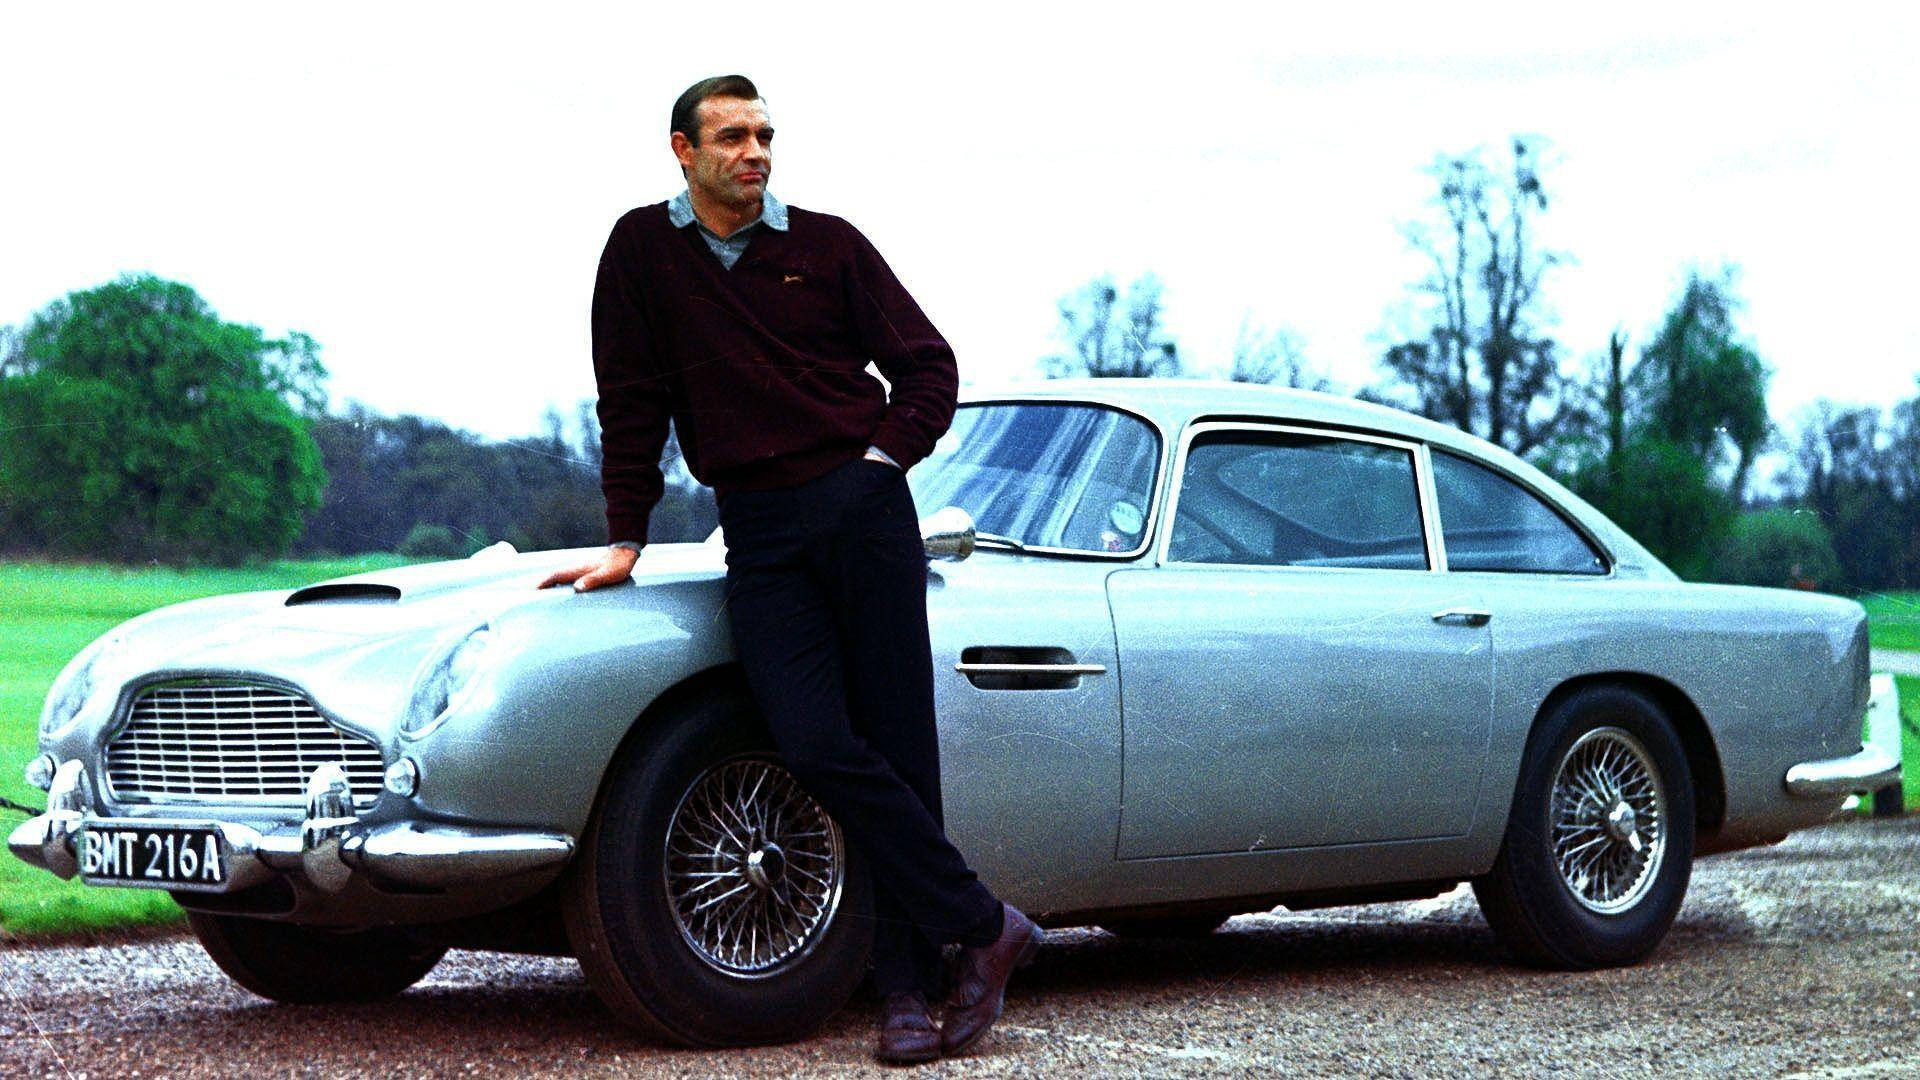 James Bond With Old Car Wallpaper